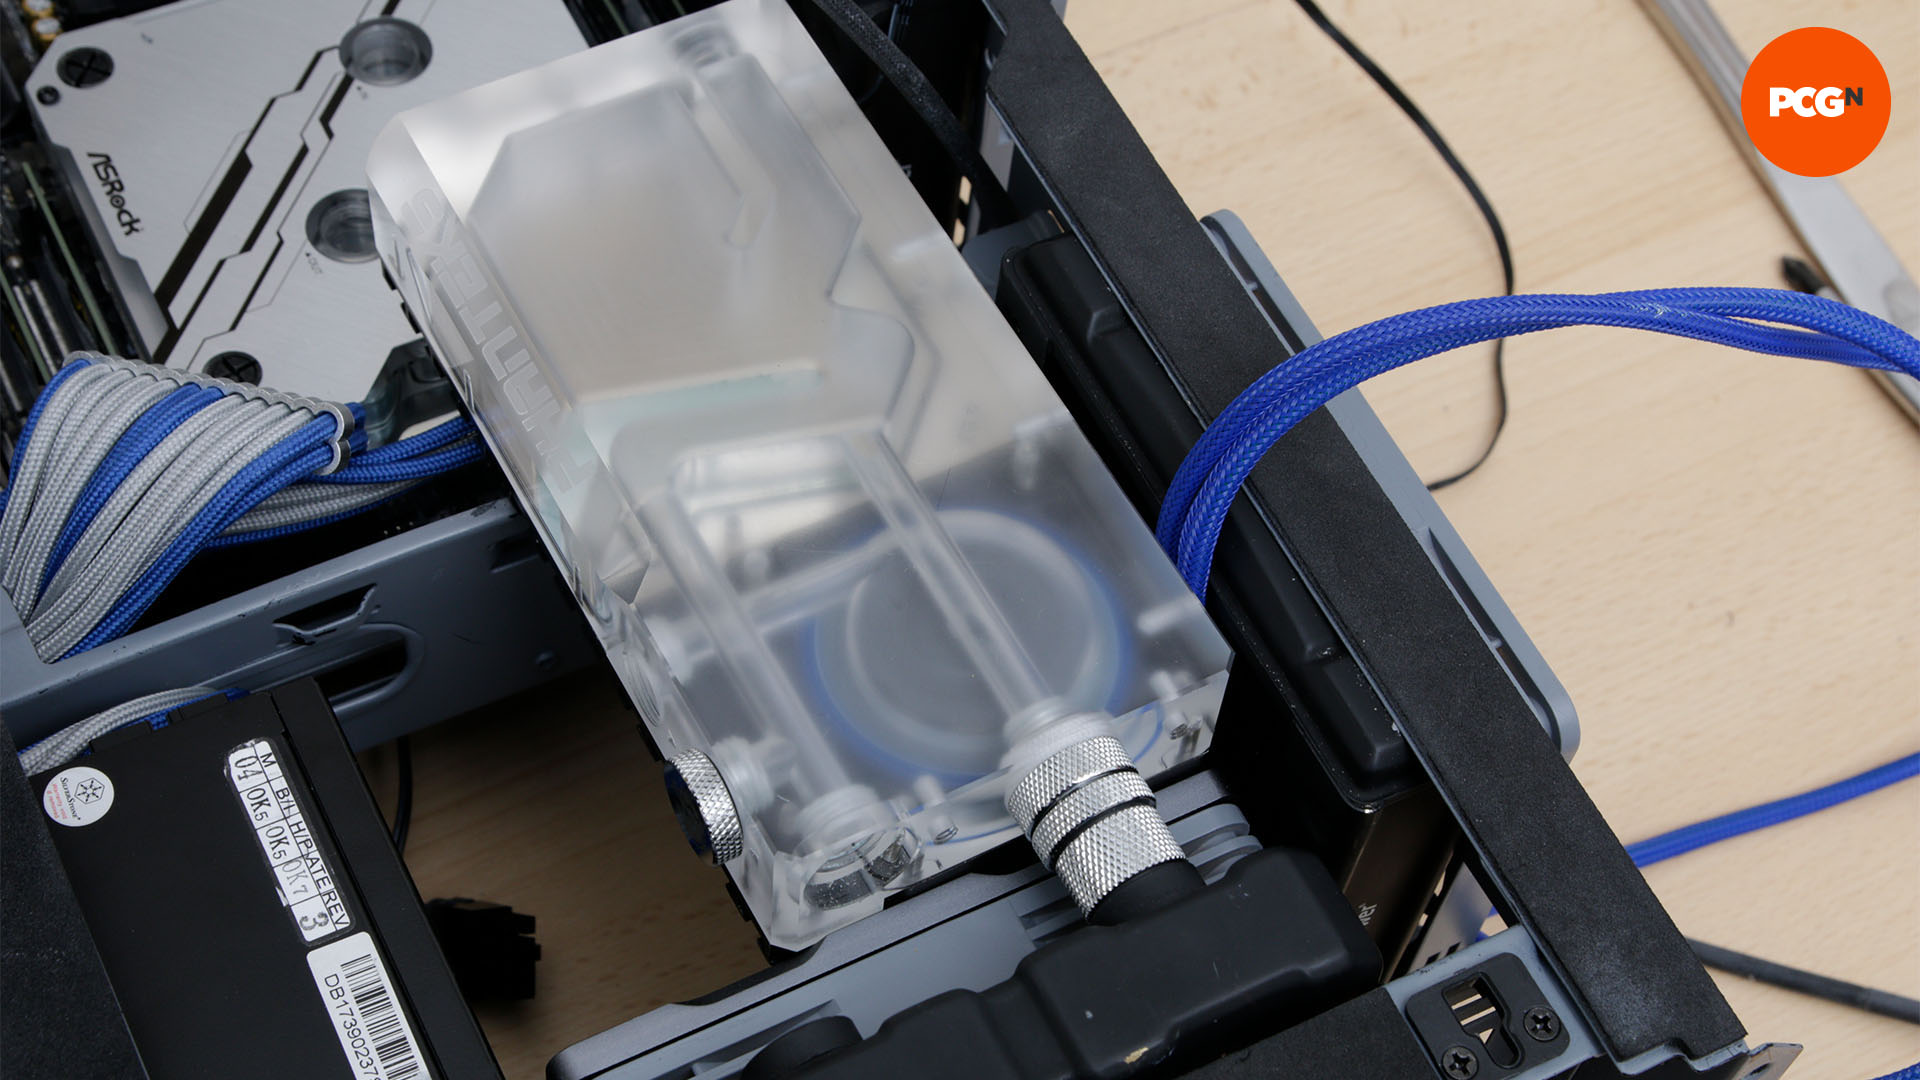 How to mount a reservoir: Suspend in water cooling loop